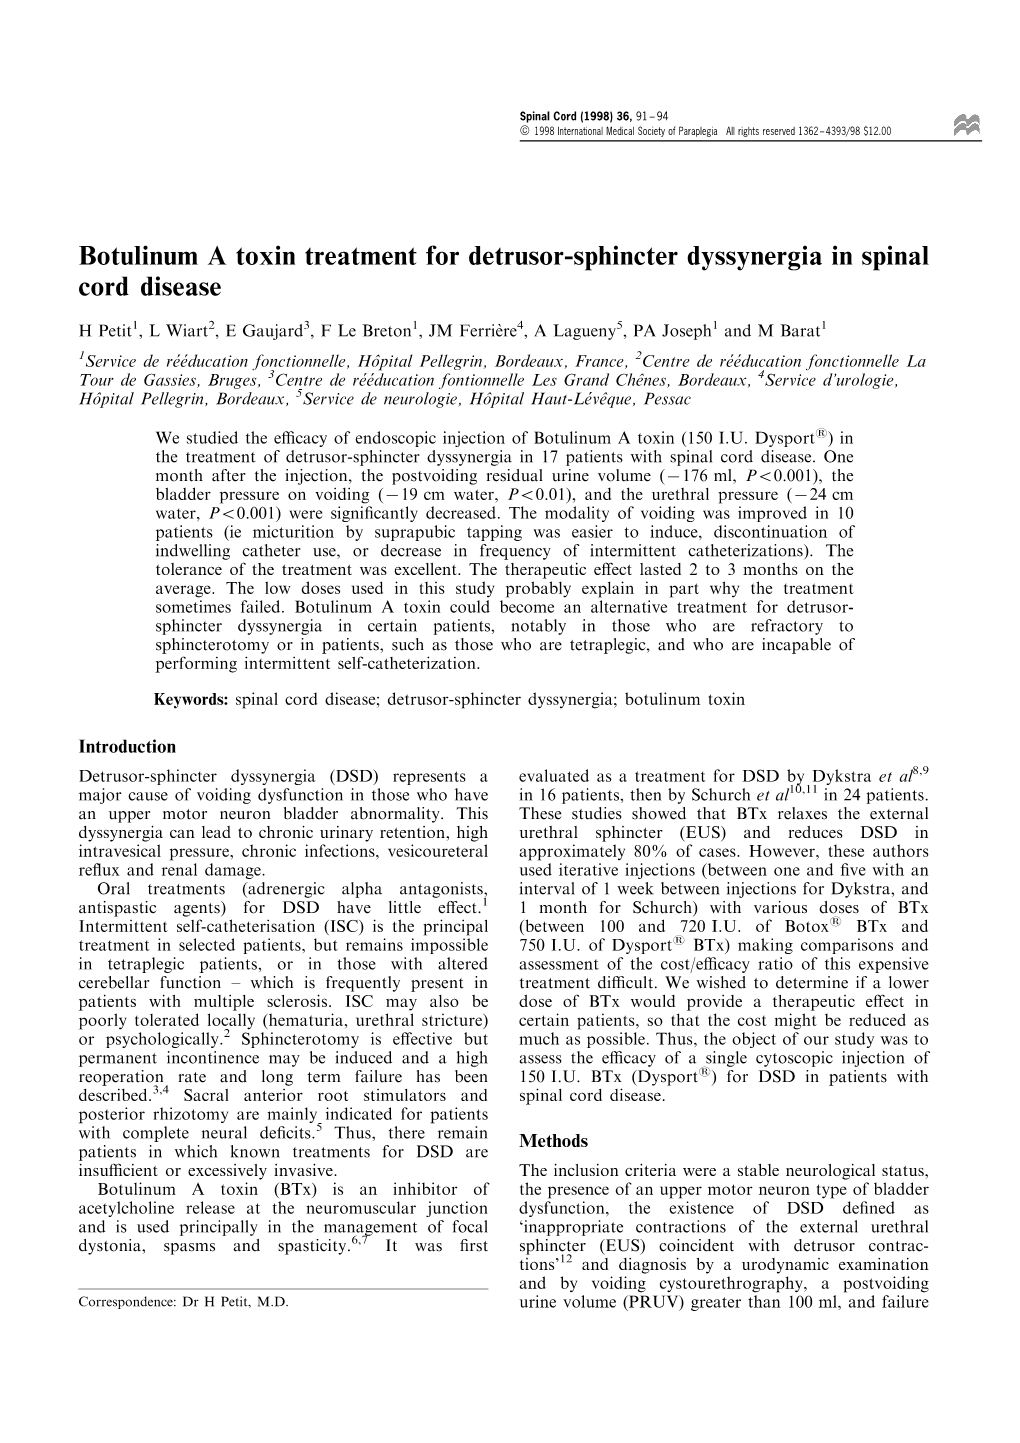 Botulinum a Toxin Treatment for Detrusor-Sphincter Dyssynergia in Spinal Cord Disease